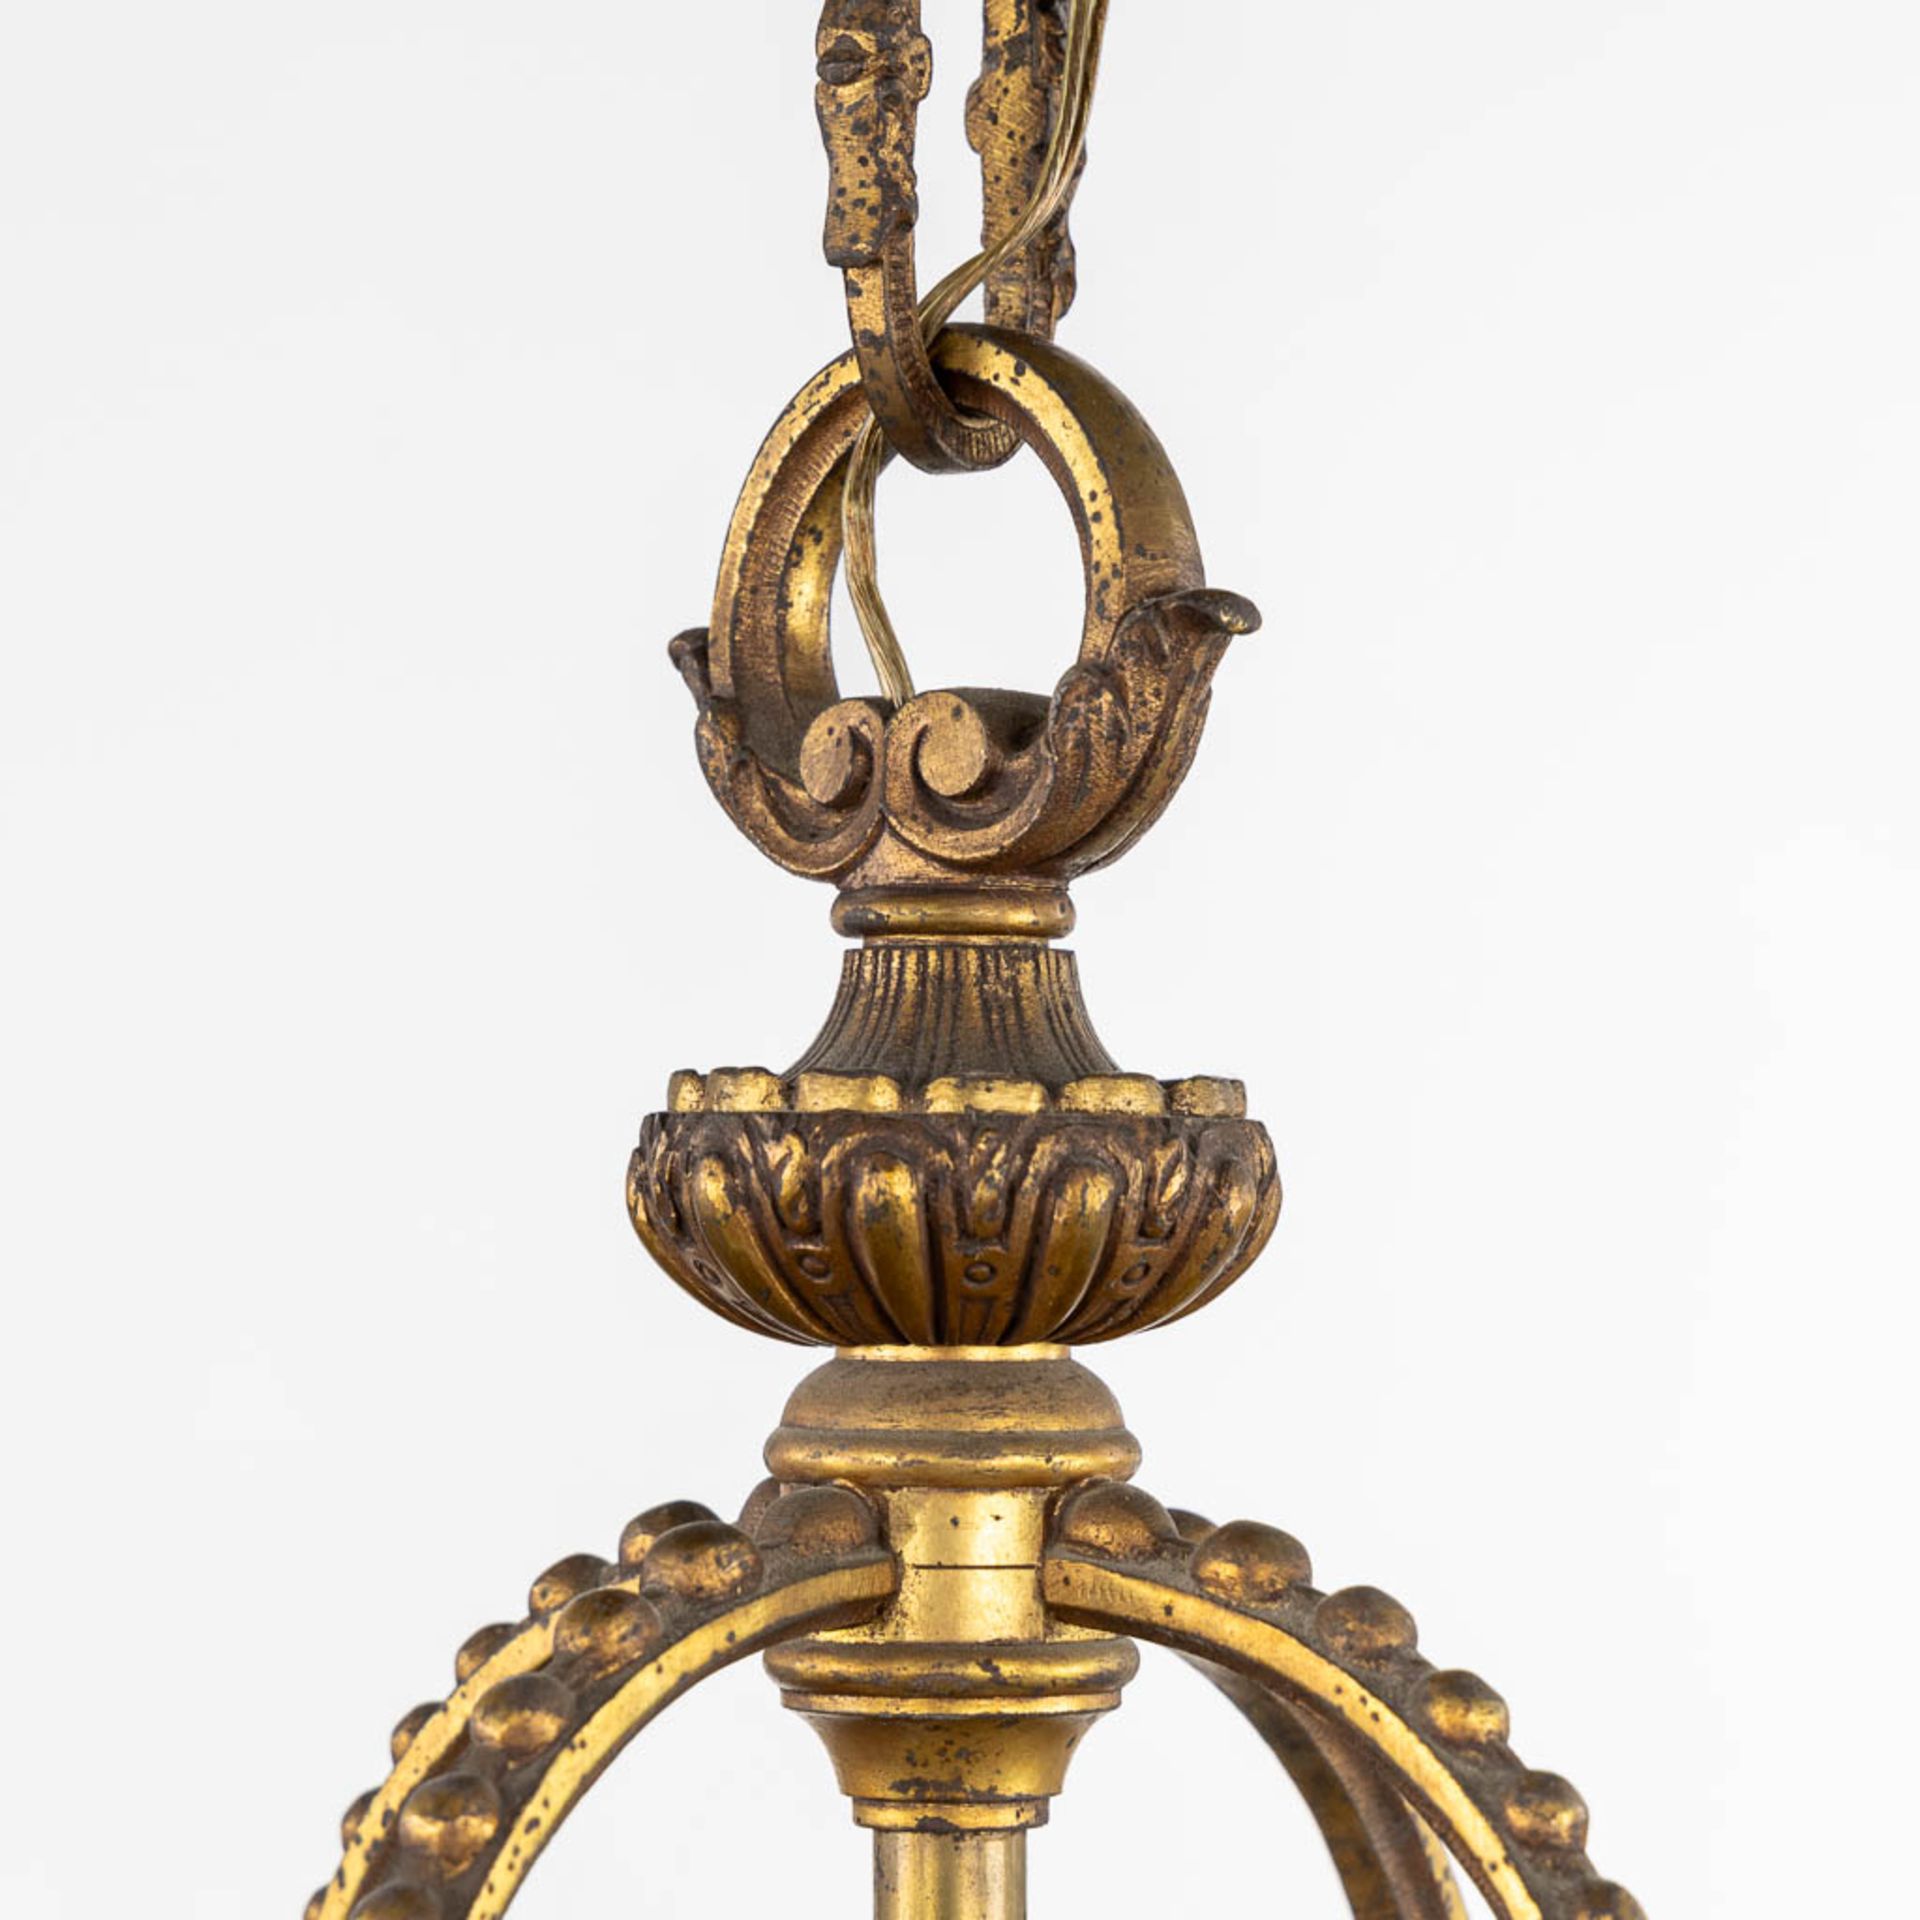 A lantern, brass and glass in Louis XVI style. (H:68 x D:37 cm) - Image 4 of 11